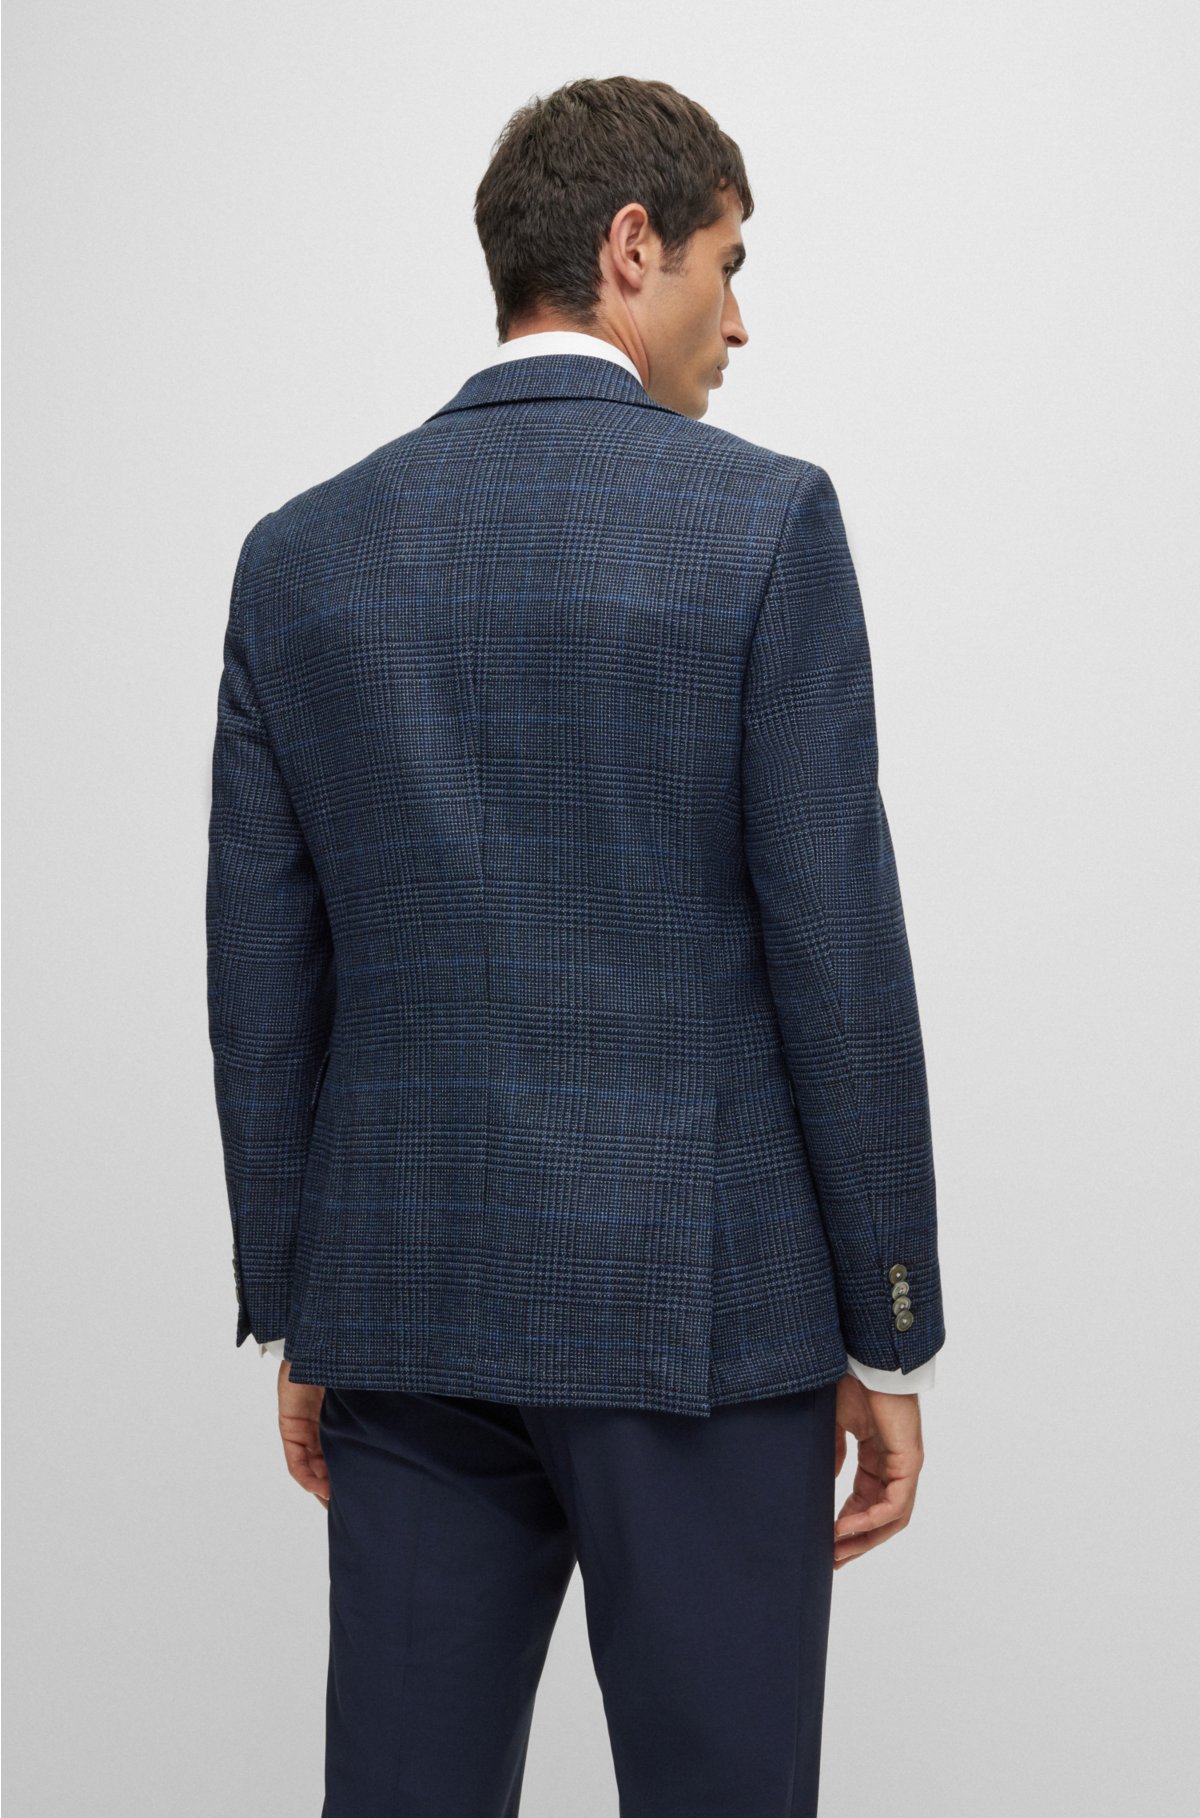 BOSS - Slim-fit jacket in a checked stretch-wool blend